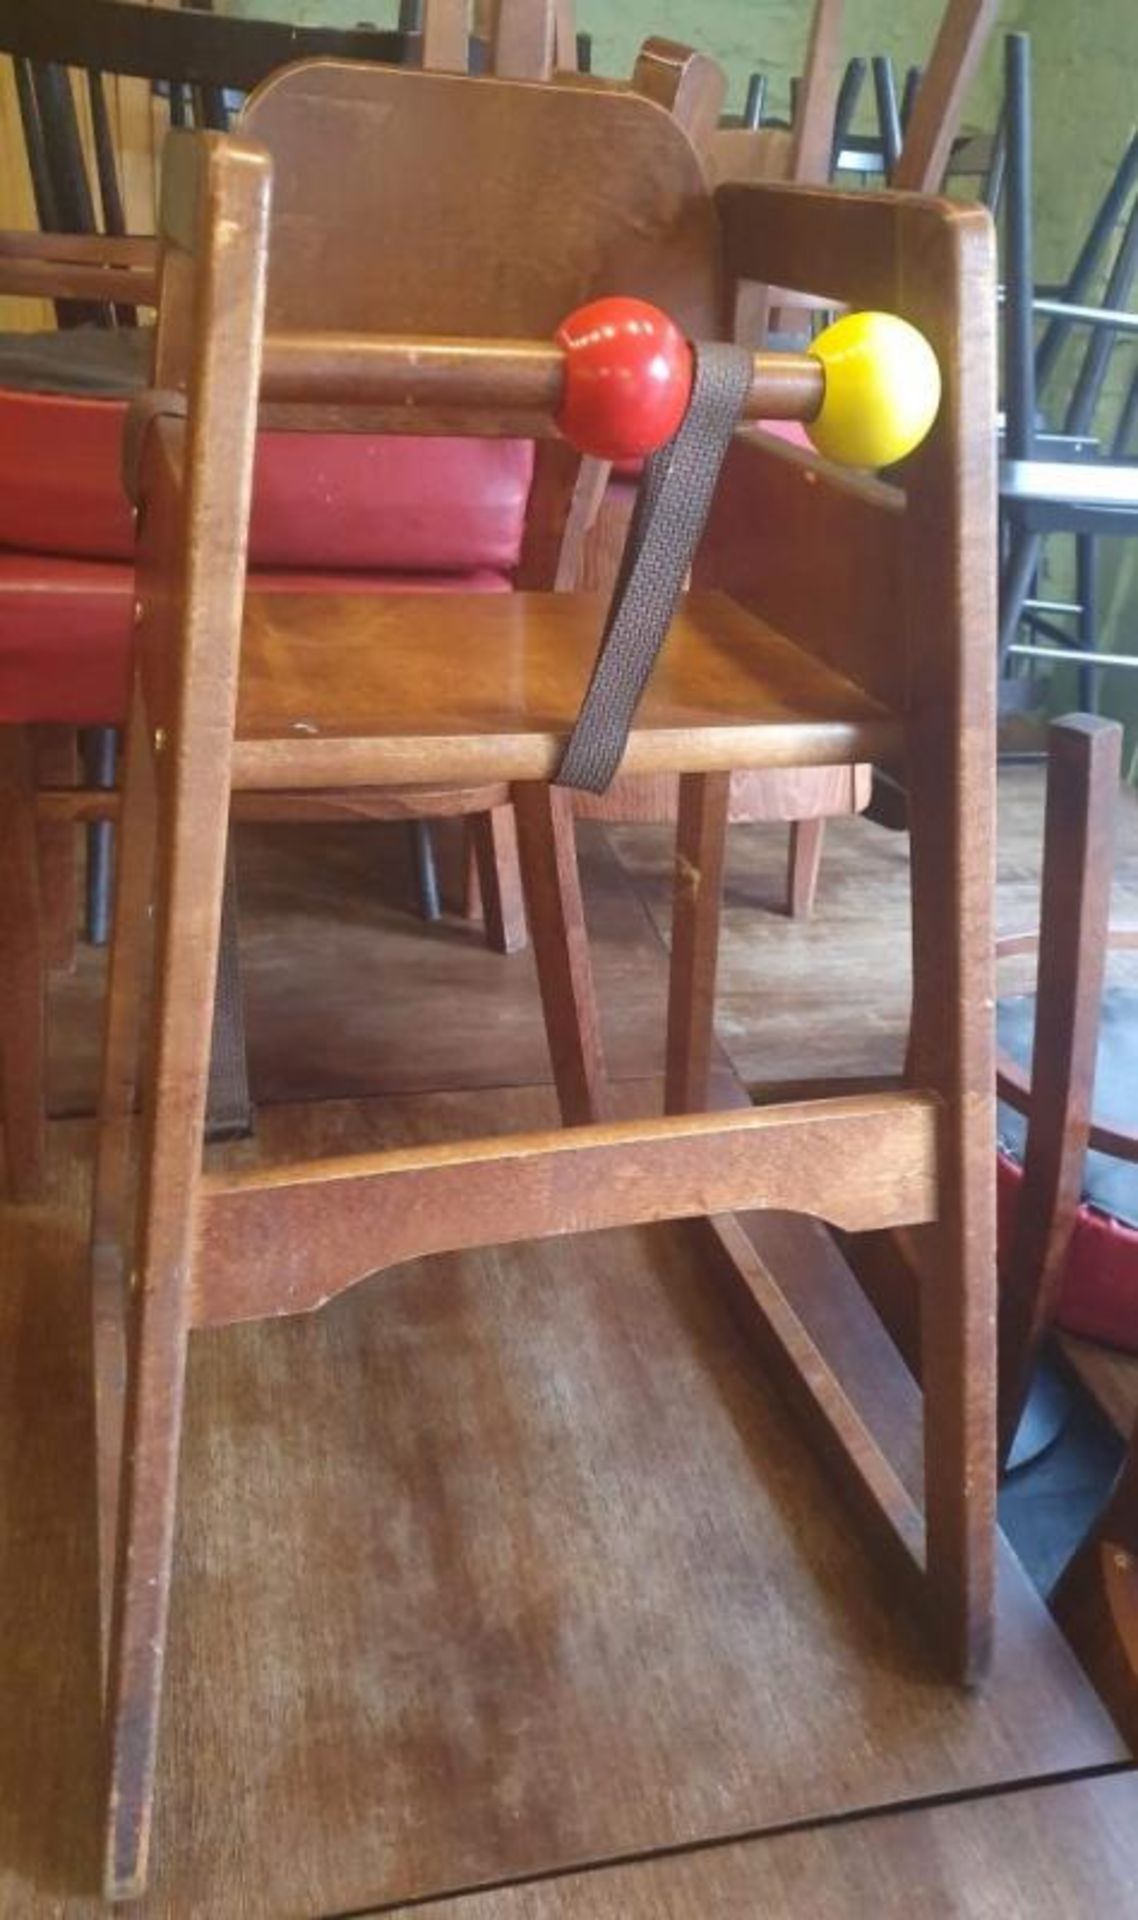 A Pair Of Wooden Commercial High Chairs - Recently Taken From A Contemporary Caribbean Restaurant &